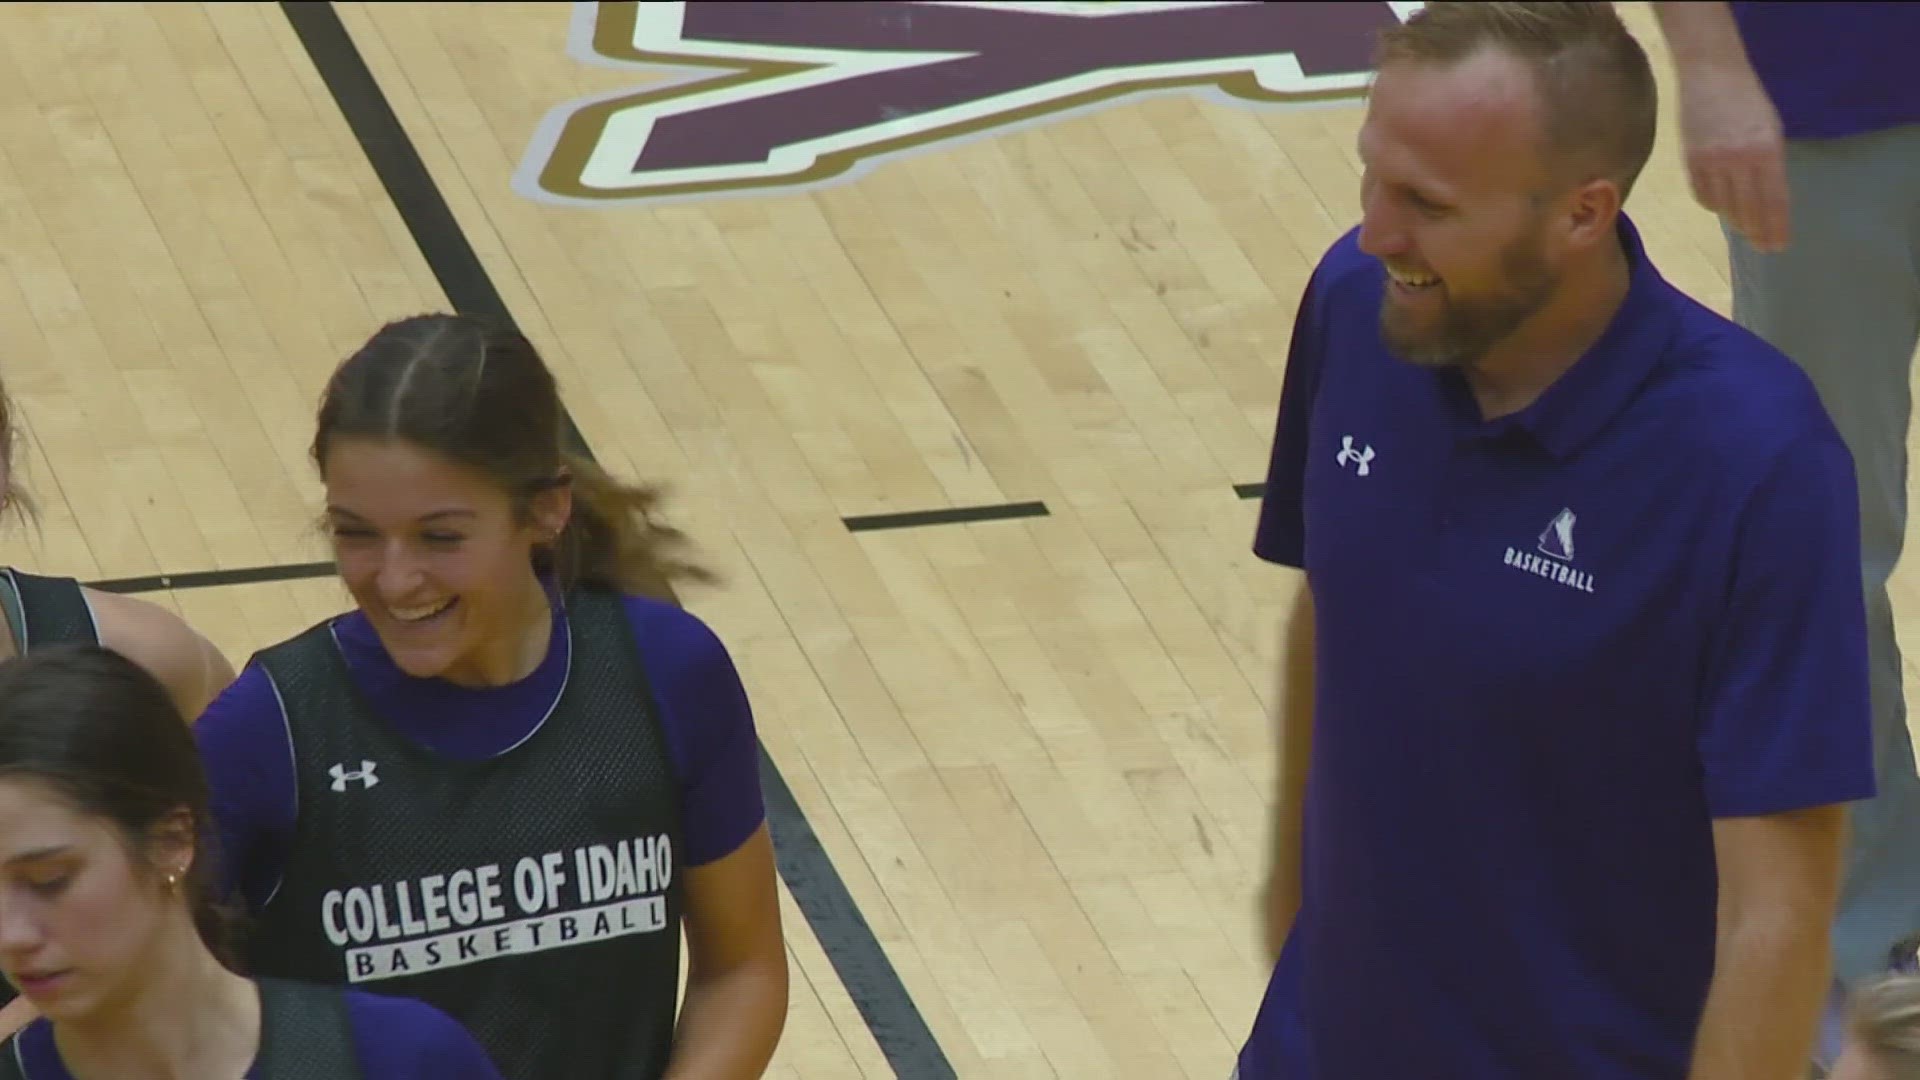 Erickson said it was "really exciting" too see the support of the College of Idaho community for the first time during Monday's Meet the Yotes scrimmage.